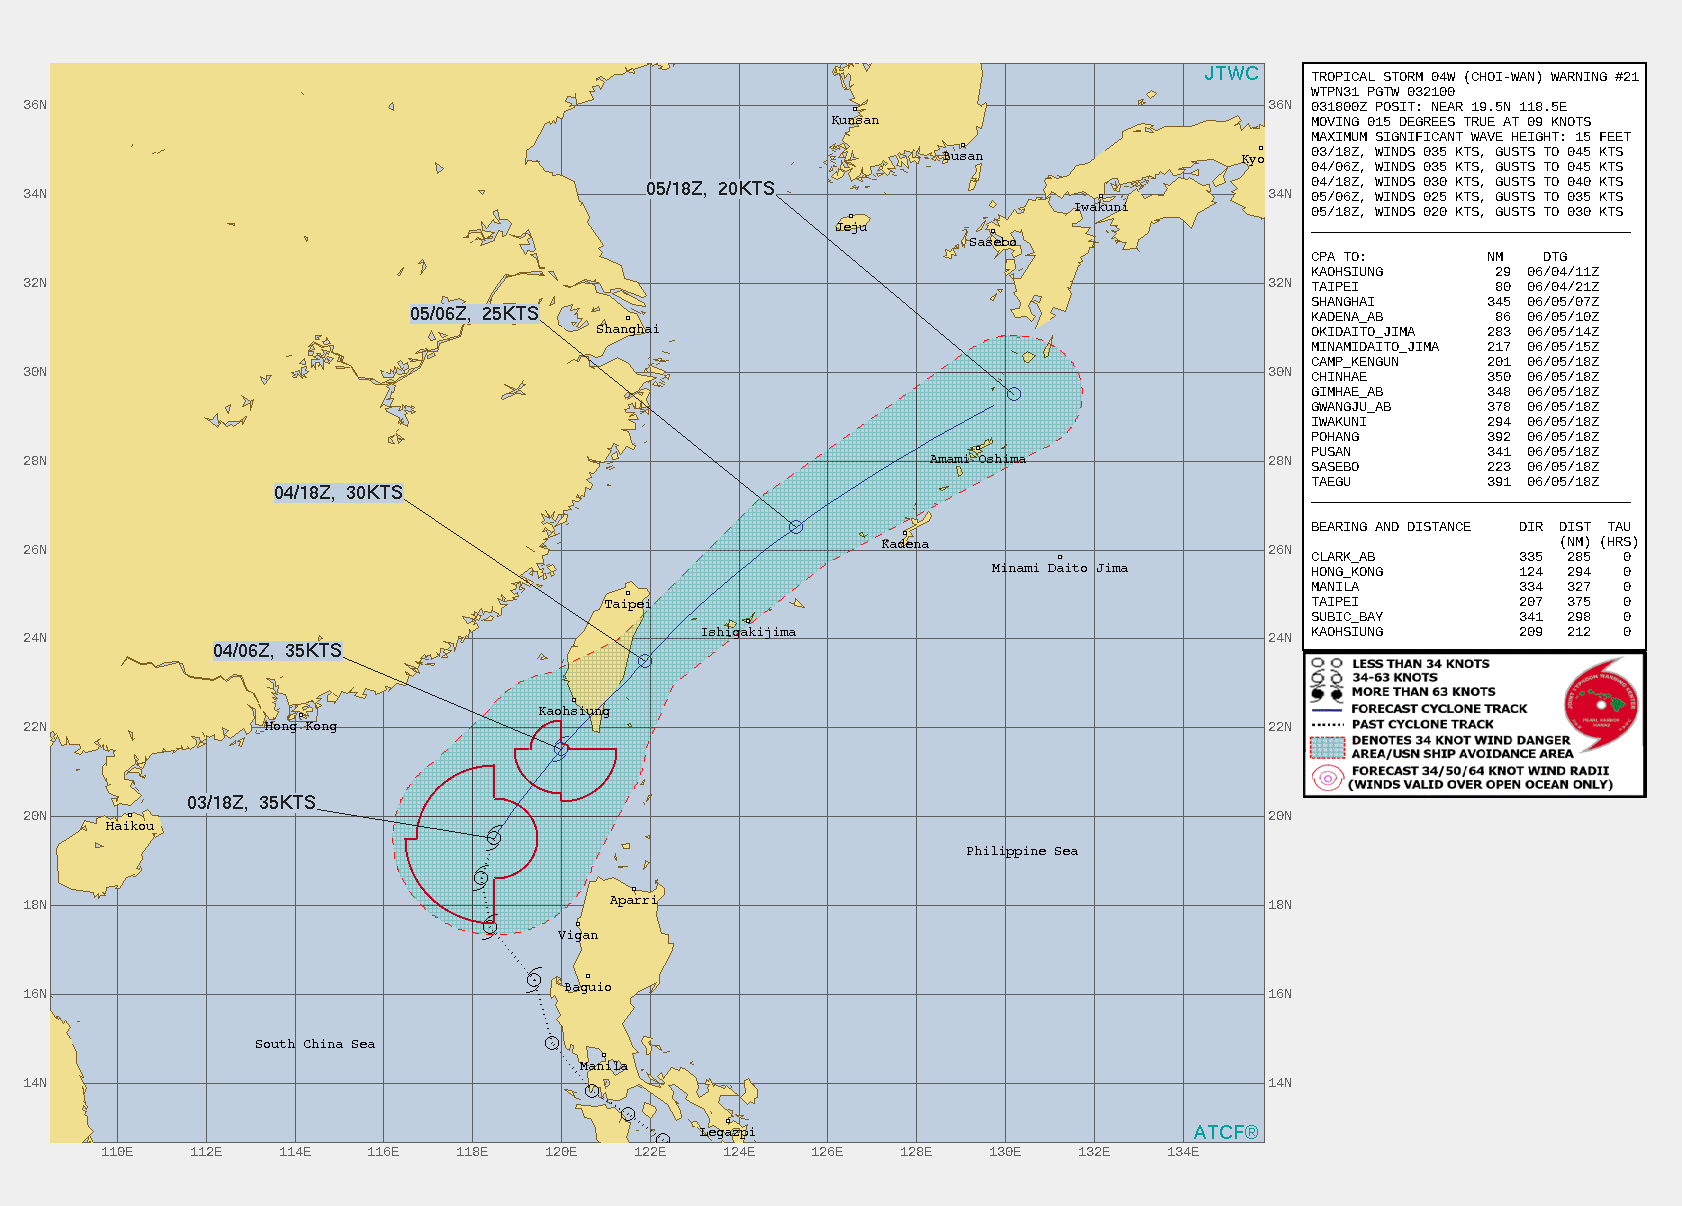 TS 04W. WARNING 21 ISSUED AT 03/21UTC.THE SYSTEM IS IN A MARGINAL ENVIRONMENT WITH GOOD WESTWARD AND EQUATORWARD OUTFLOW AND VERY WARM  (30-31C) SEA SURFACE TEMPERATURES, OFFSET BY MODERATE TO STRONG (20- 25KT) VERTICAL WIND SHEAR(VWS) FROM THE NORTHEAST. THE CYCLONE IS  TRACKING ALONG THE WESTERN PERIPHERY OF THE SUBTROPICAL RIDGE (STR)  TO THE EAST. THE FORECAST TRACK HAS BEEN REDUCED 48H TO INDICATE DISSIPATION OVER WATER  SOUTH OF KYUSHU, JAPAN.TS 04W HAS BEGUN TO MAKE ITS TURN NORTHEASTWARD AROUND THE  AXIS OF THE STR AND AFTER 12H WILL BEGIN TO WEAKEN DUE TO  INTERACTION WITH THE SOUTHERN PORTION OF THE CHUNGYANG MOUNTAIN  RANGE IN TAIWAN. BY 24H, TS 04W WILL WEAKEN TO 30 KNOTS DUE TO  INCREASING VWS ASSOCIATED WITH STRONG NORTHEASTERLY FLOW FROM A  SECONDARY STR ANCHORED OVER SOUTHEASTERN CHINA. BY 36H, THE  SYSTEM WILL WEAKEN TO 25 KNOTS AS IT PASSES EAST-NORTHEAST OF KADENA  AIR BASE. AT 48H, THE SYSTEM WILL BE FULLY DISSIPATED AS IT GETS  ABSORBED INTO THE MEI-YU FRONTAL BOUNDARY APPROACHING FROM THE WEST,  POSSIBLY SOONER.